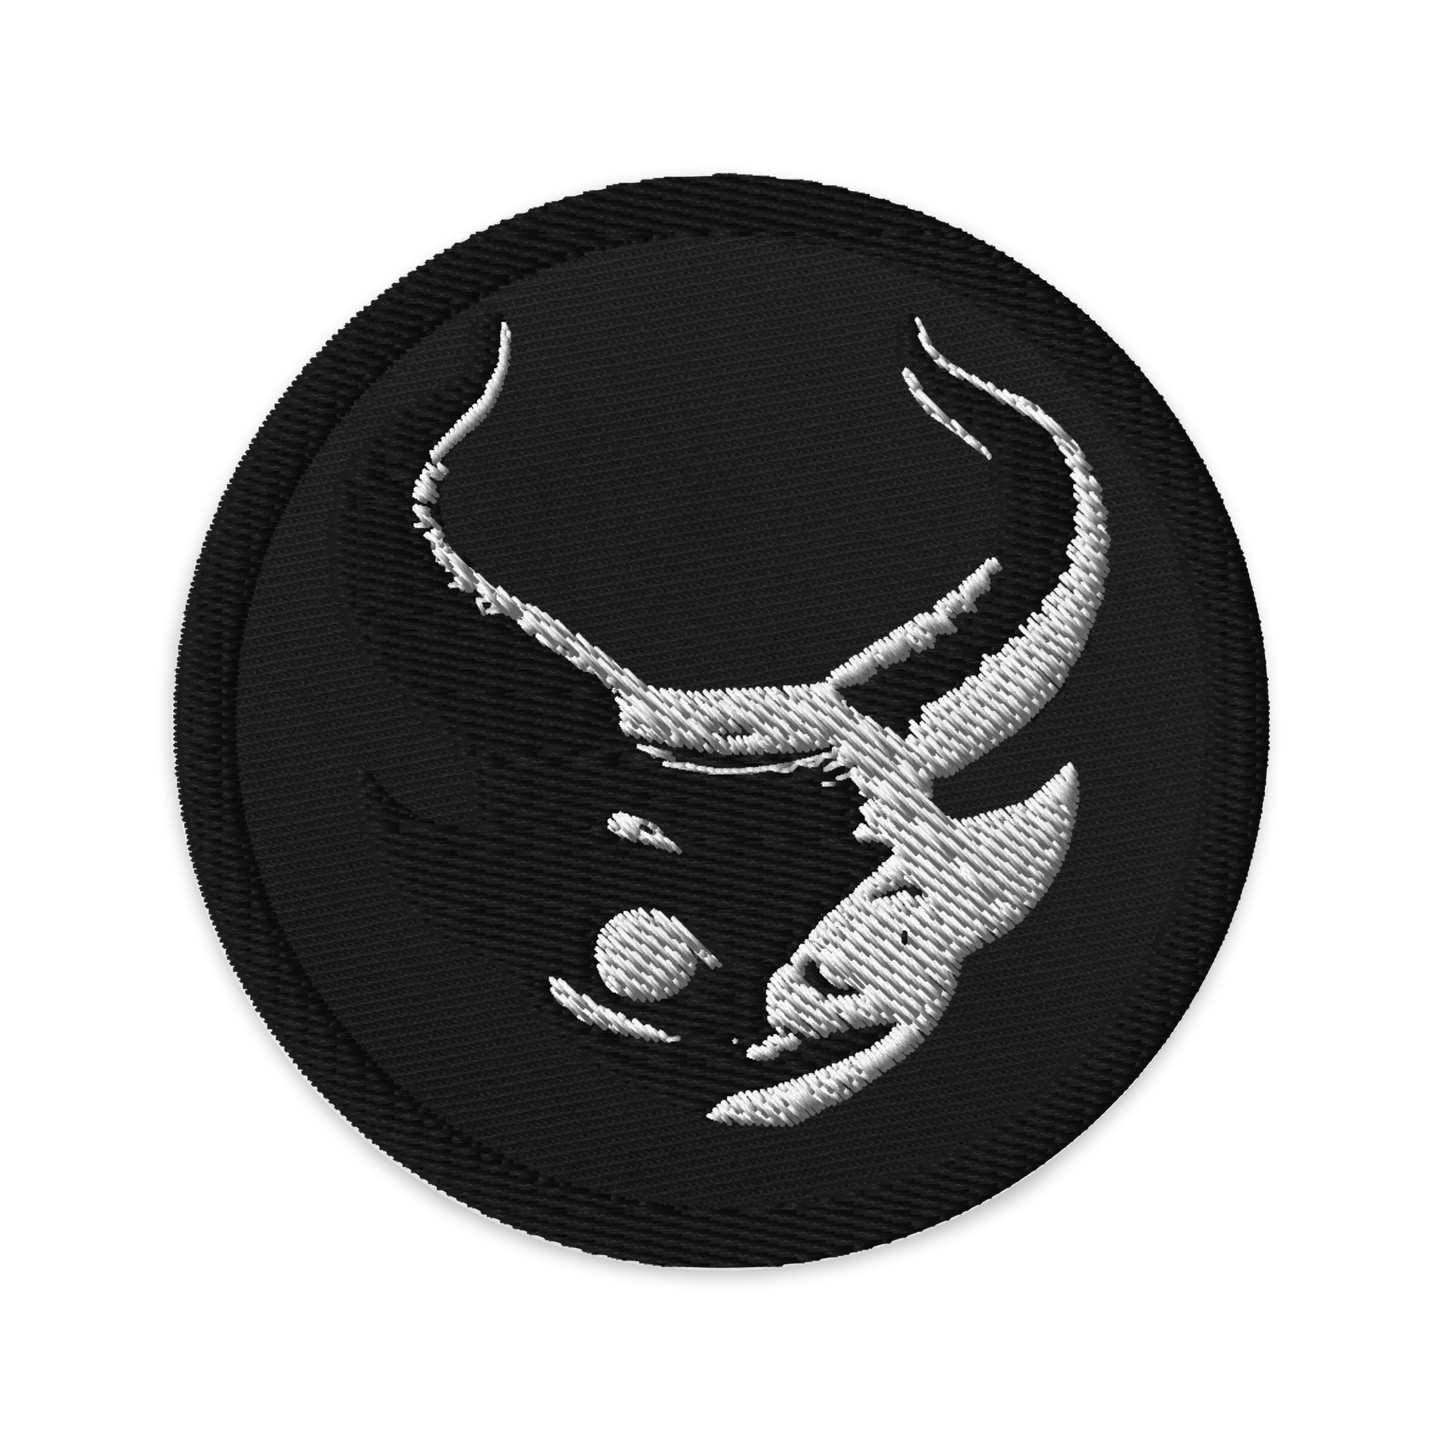 WEARDOZ "Horns" Embroidered patch